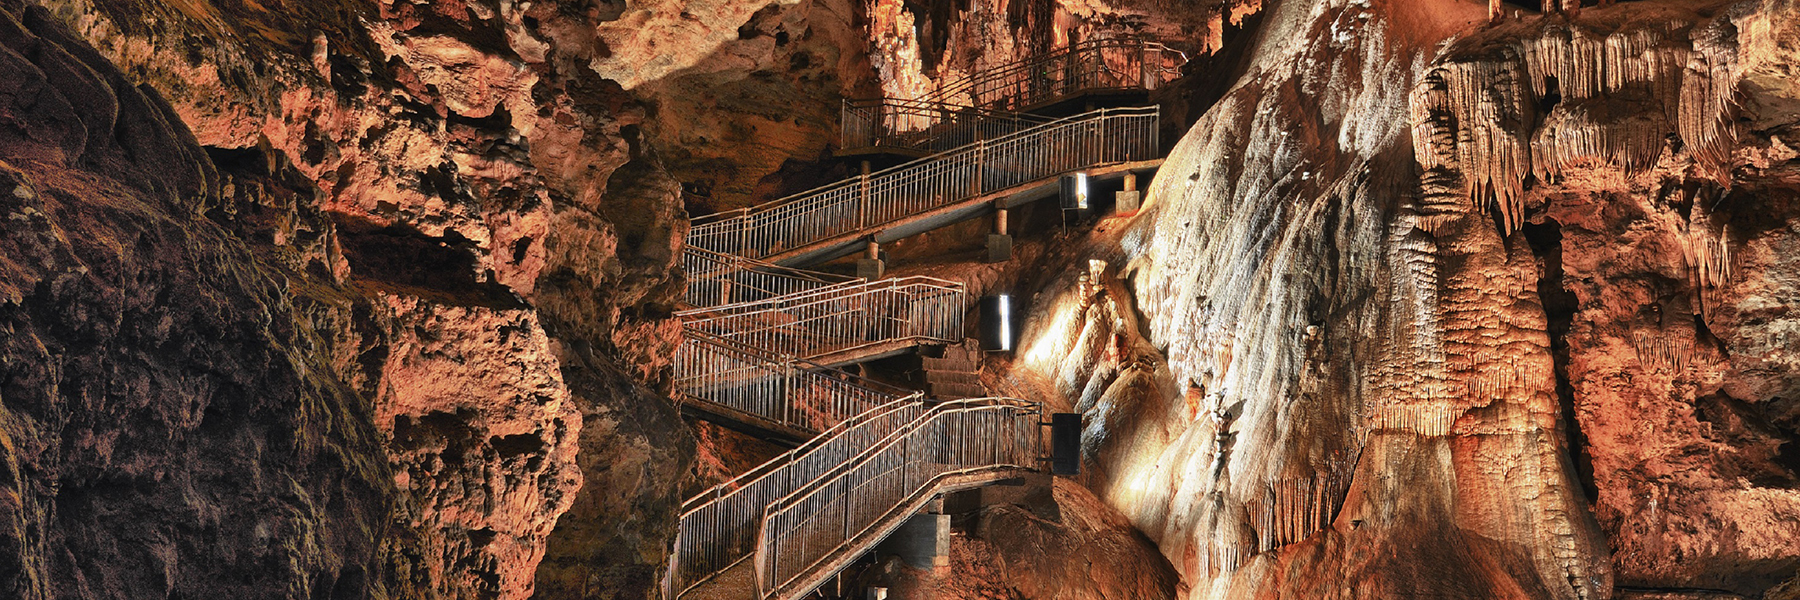 Meramec Caverns offers some of the rarest and largest cave formations in the world.